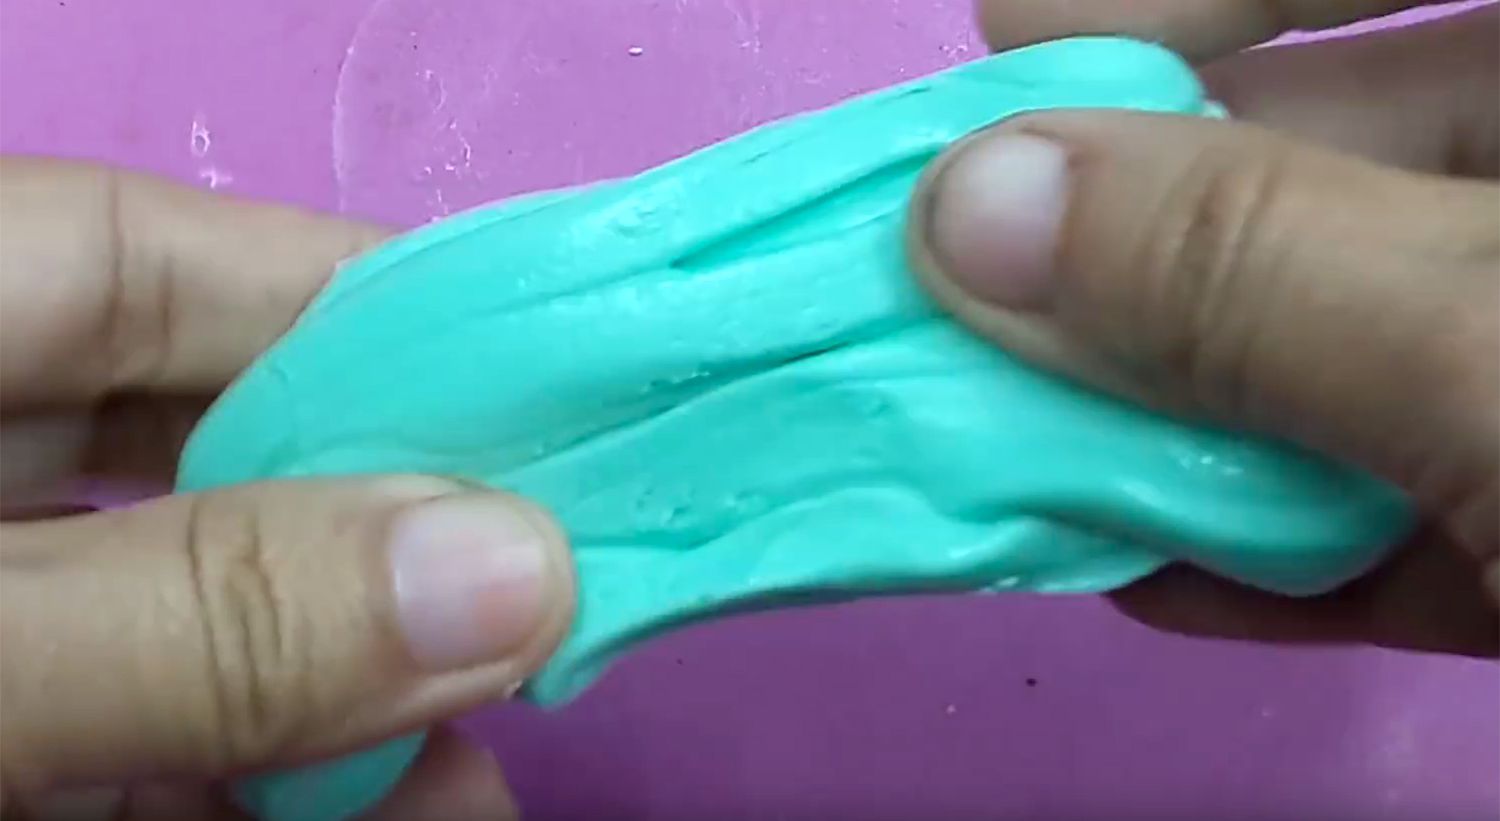 Homemade Slime: How to Make It Safely at Home  PEOPLE.com